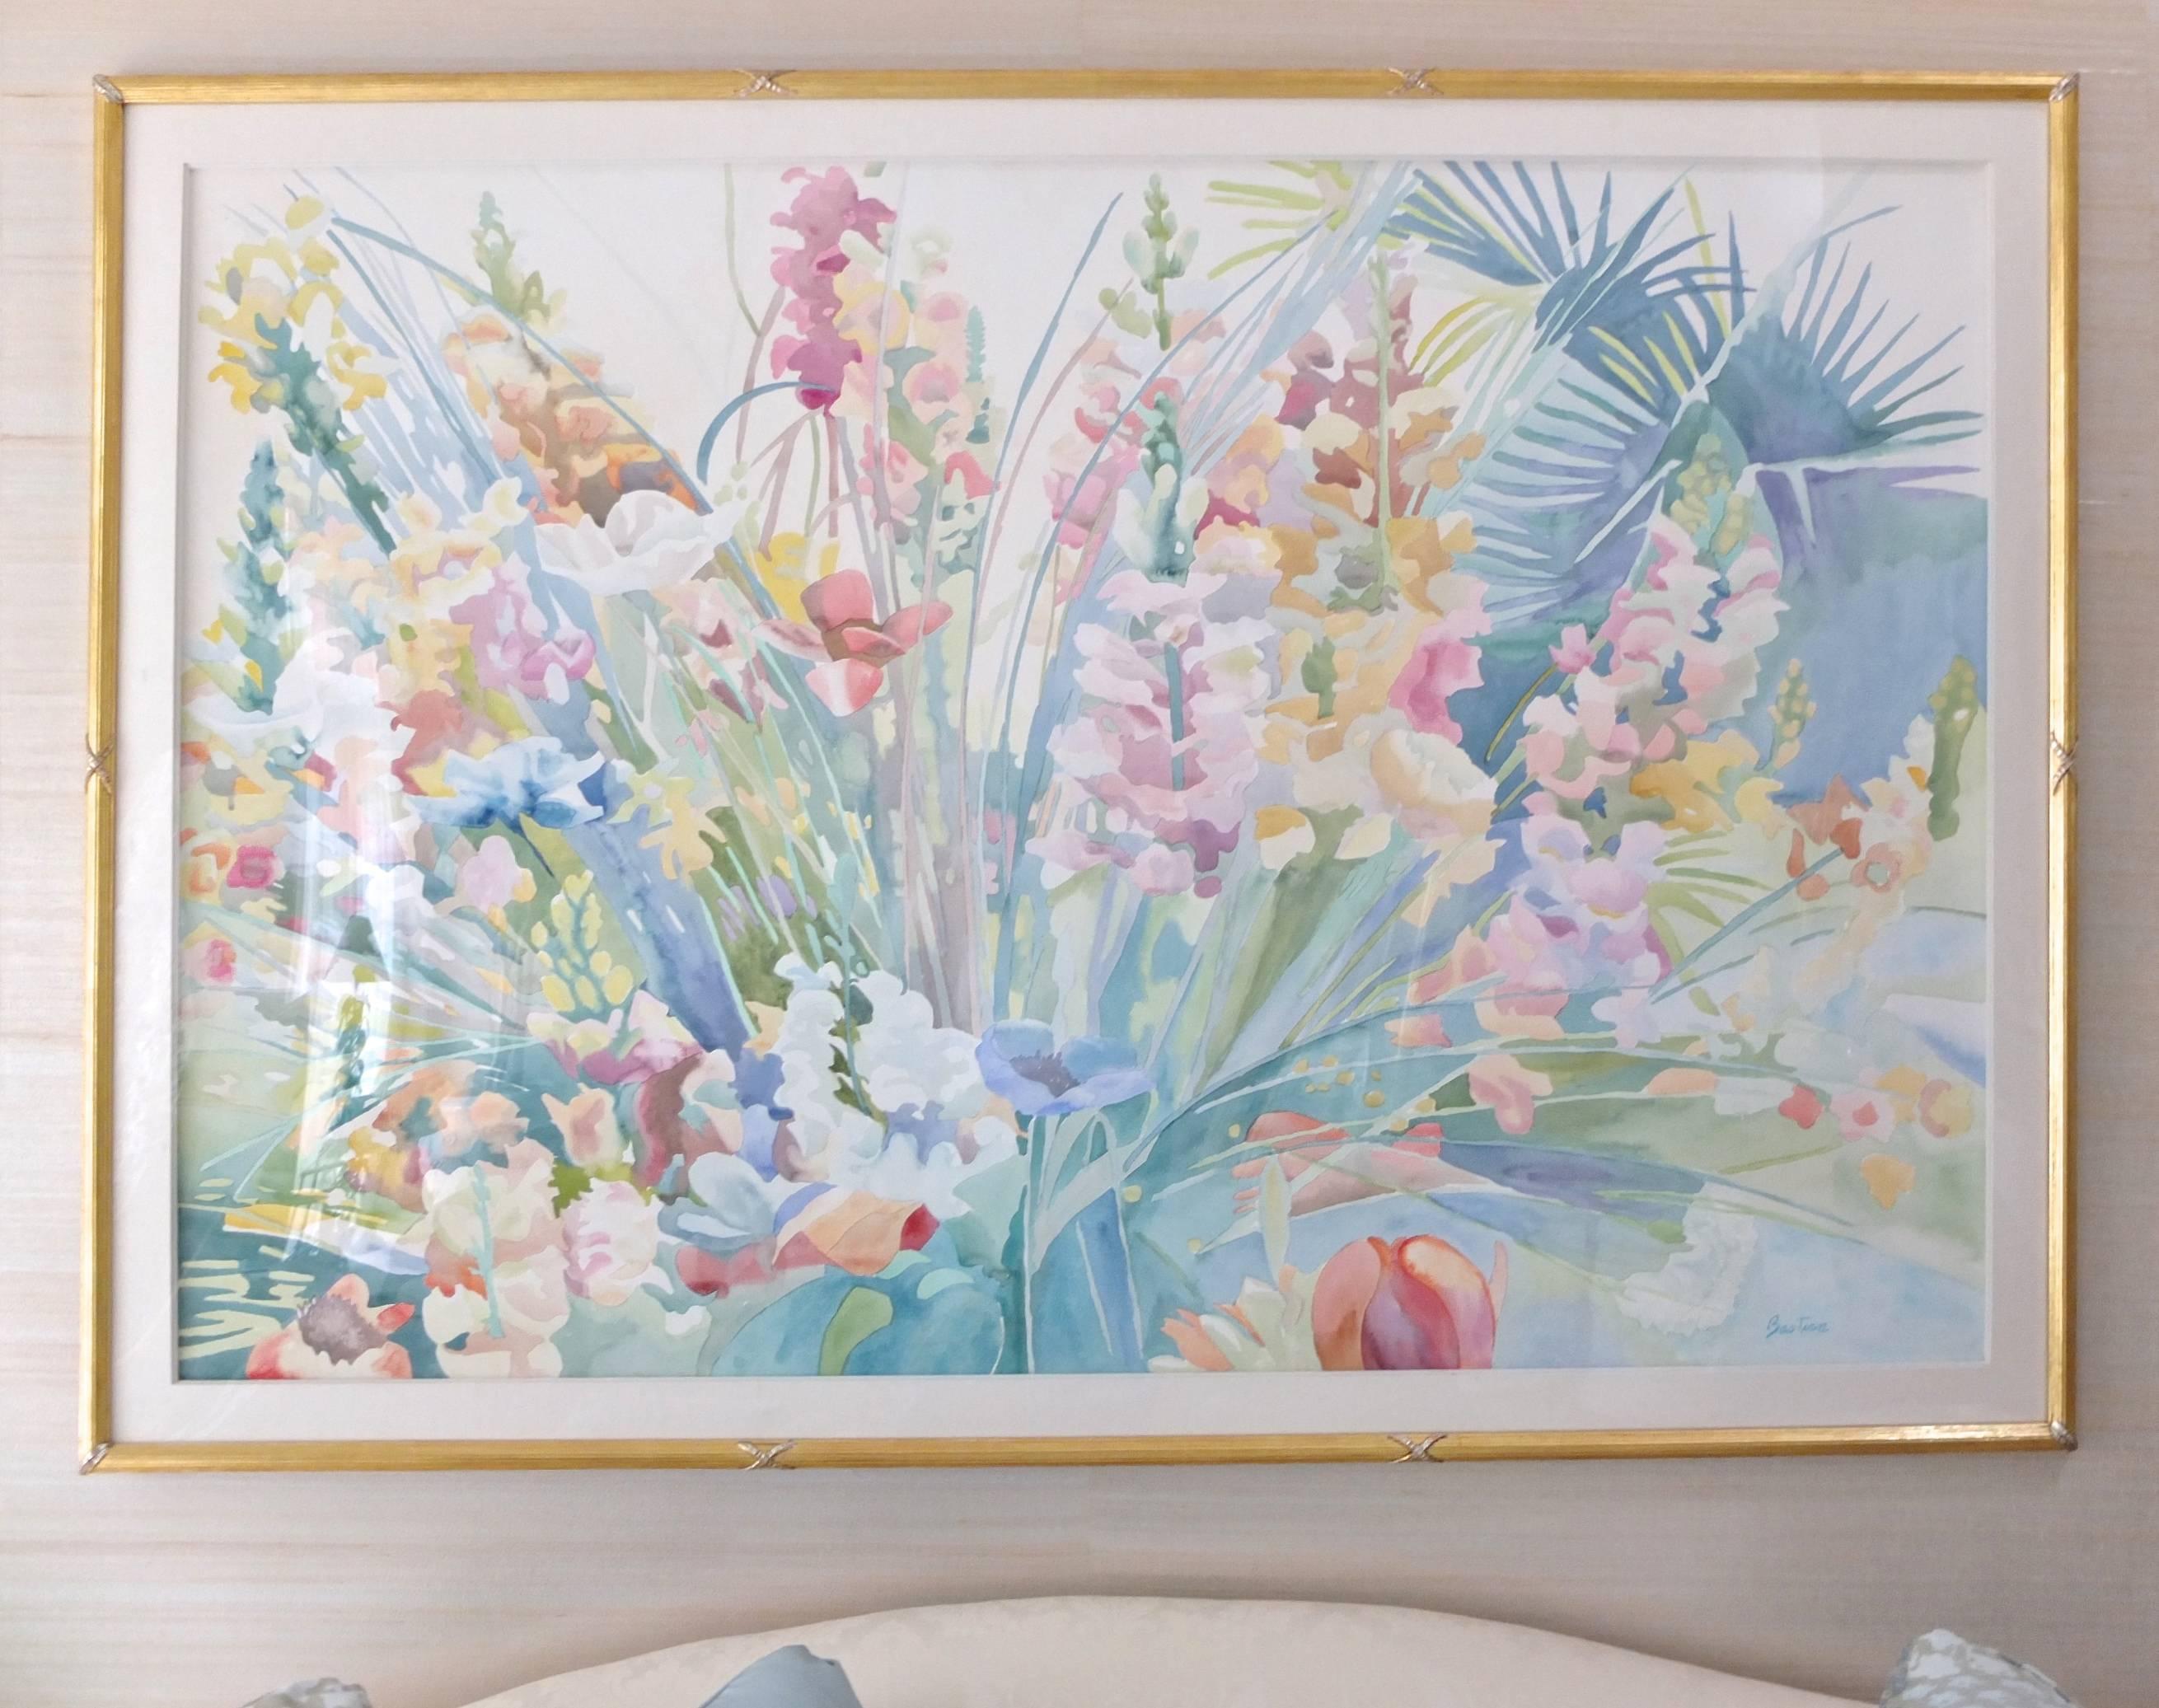 Large-scale framed watercolor on paper by Linda Bastian titled 